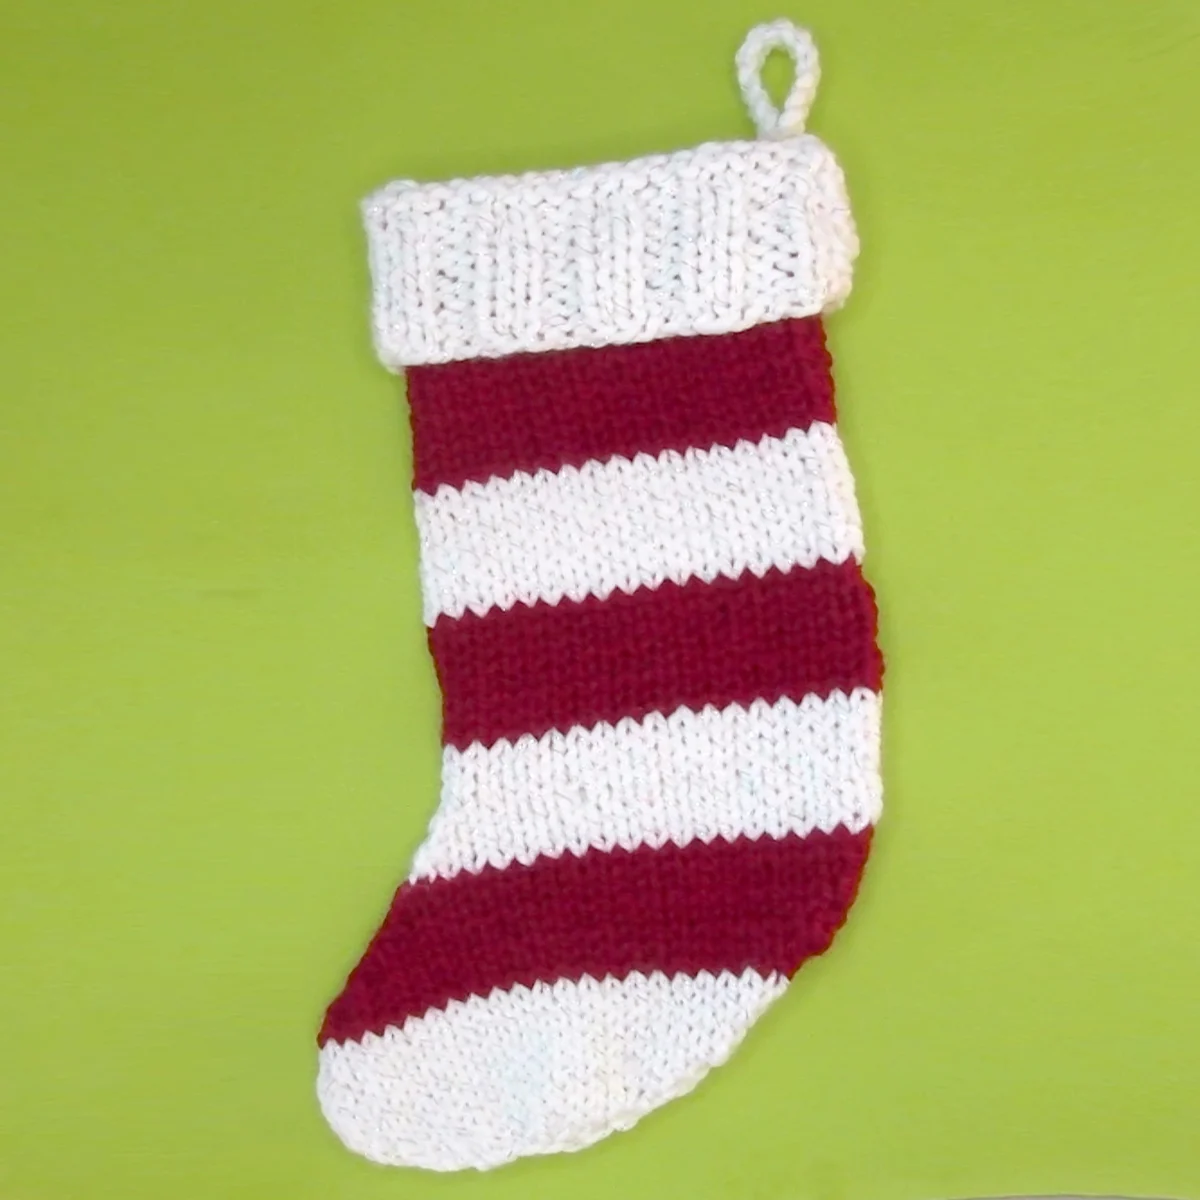 Red and white striped knitted Christmas Stocking on a green background.